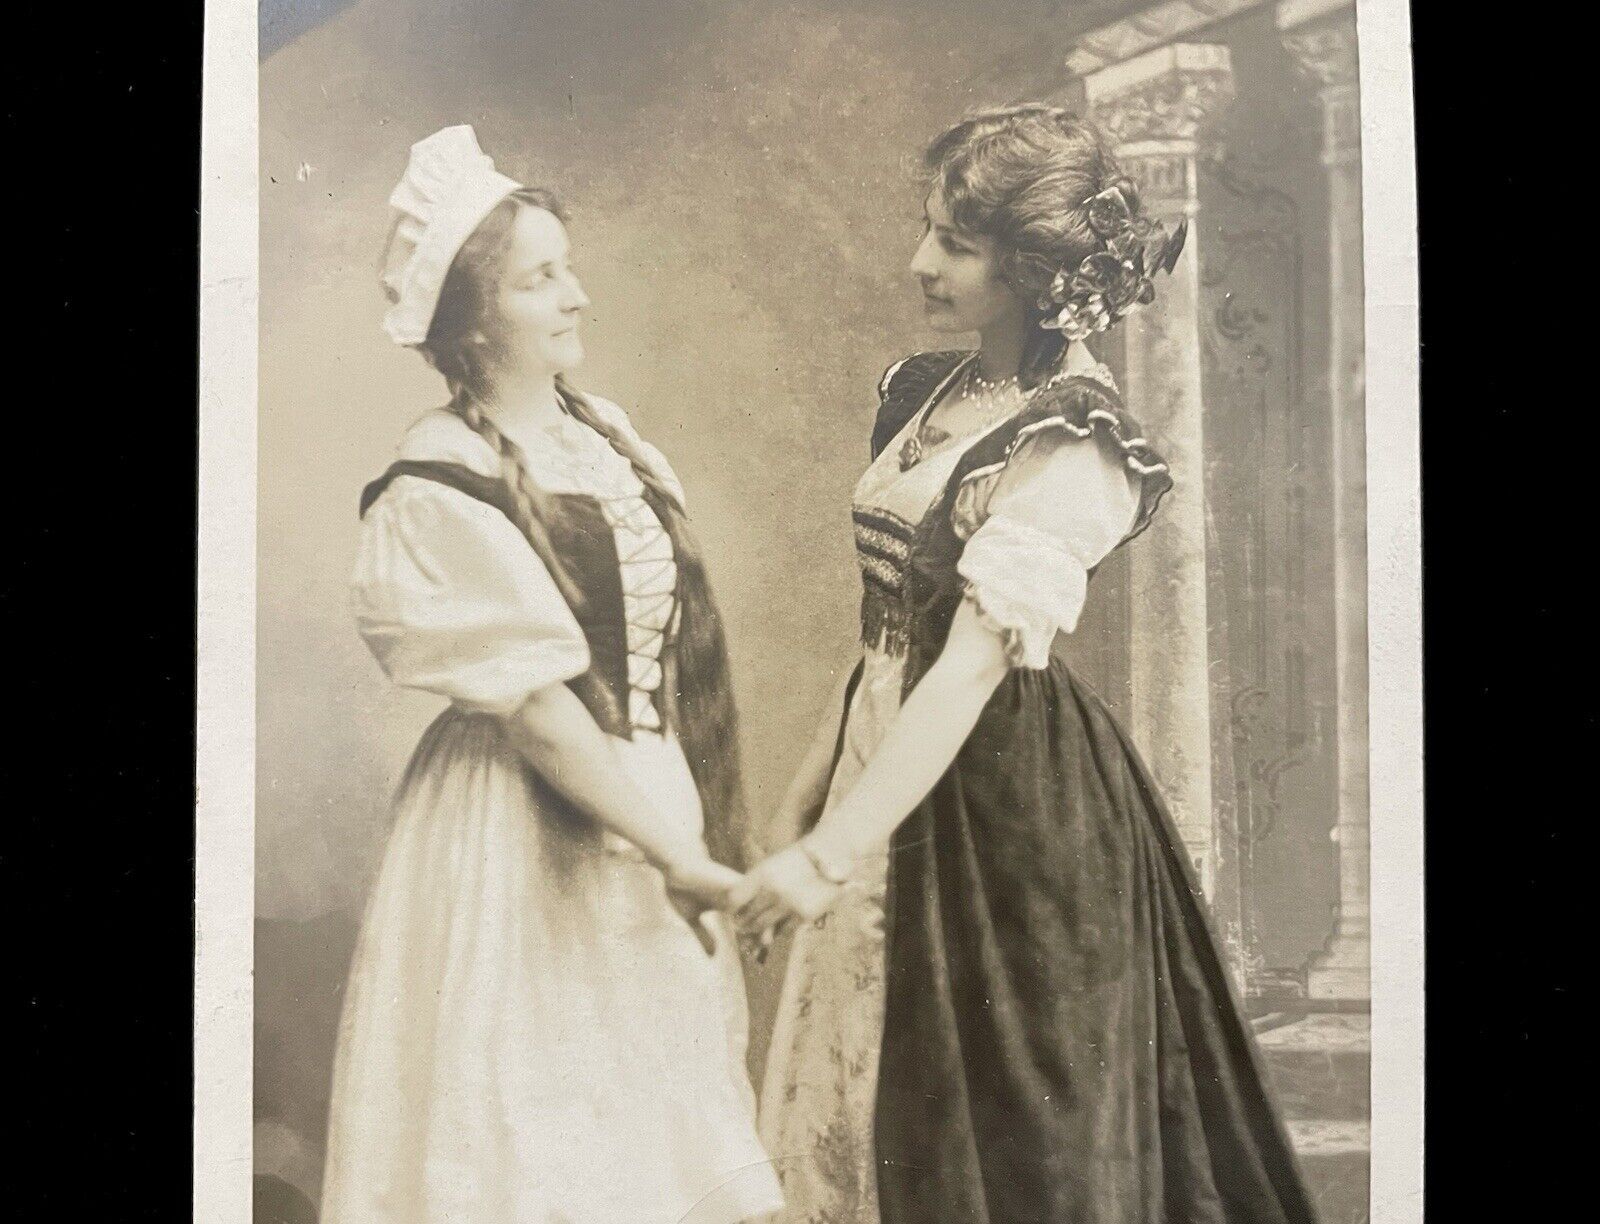 AFFECTIONATE WOMAN HOLDING HANDS & GAZING AT EACH OTHER  RPPC SALT LAKE UTAH GAY